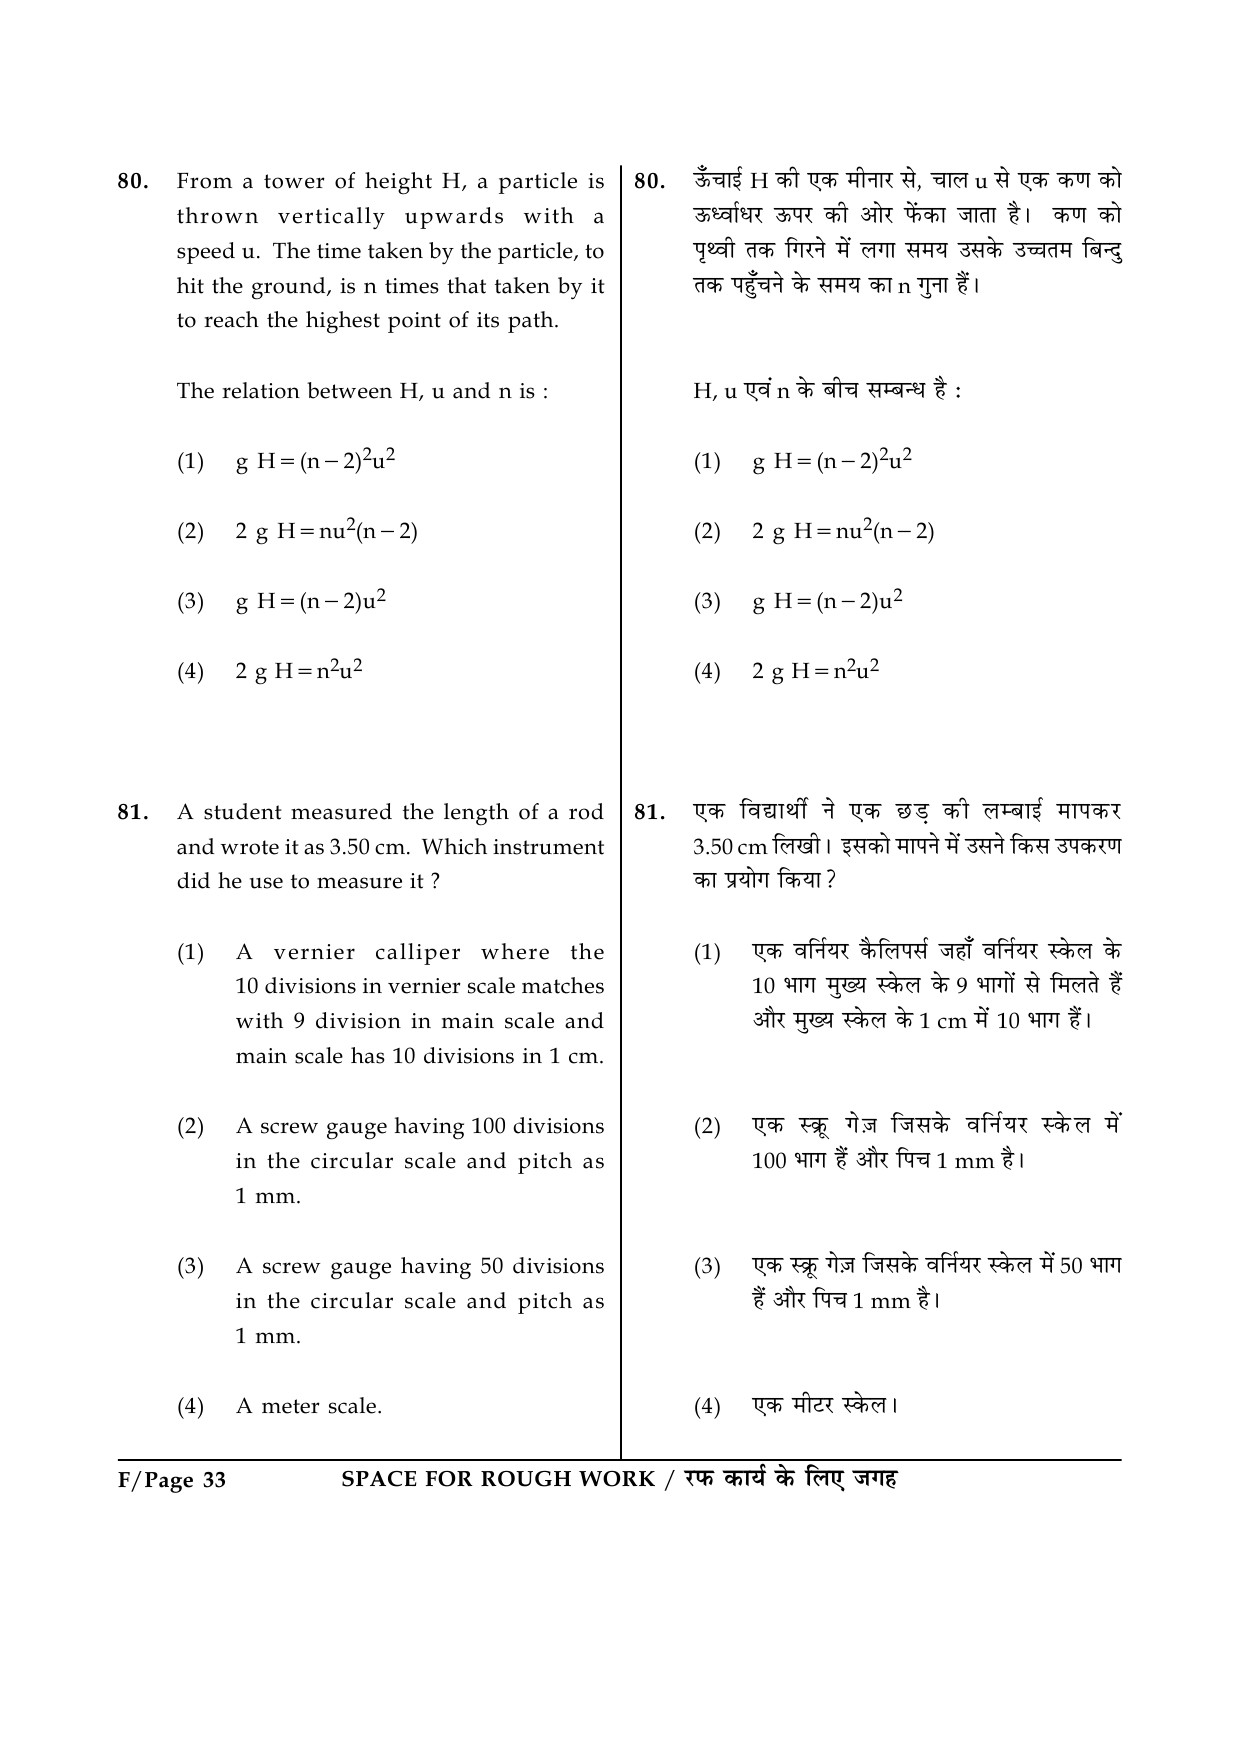 JEE Main Exam Question Paper 2014 Booklet F 33